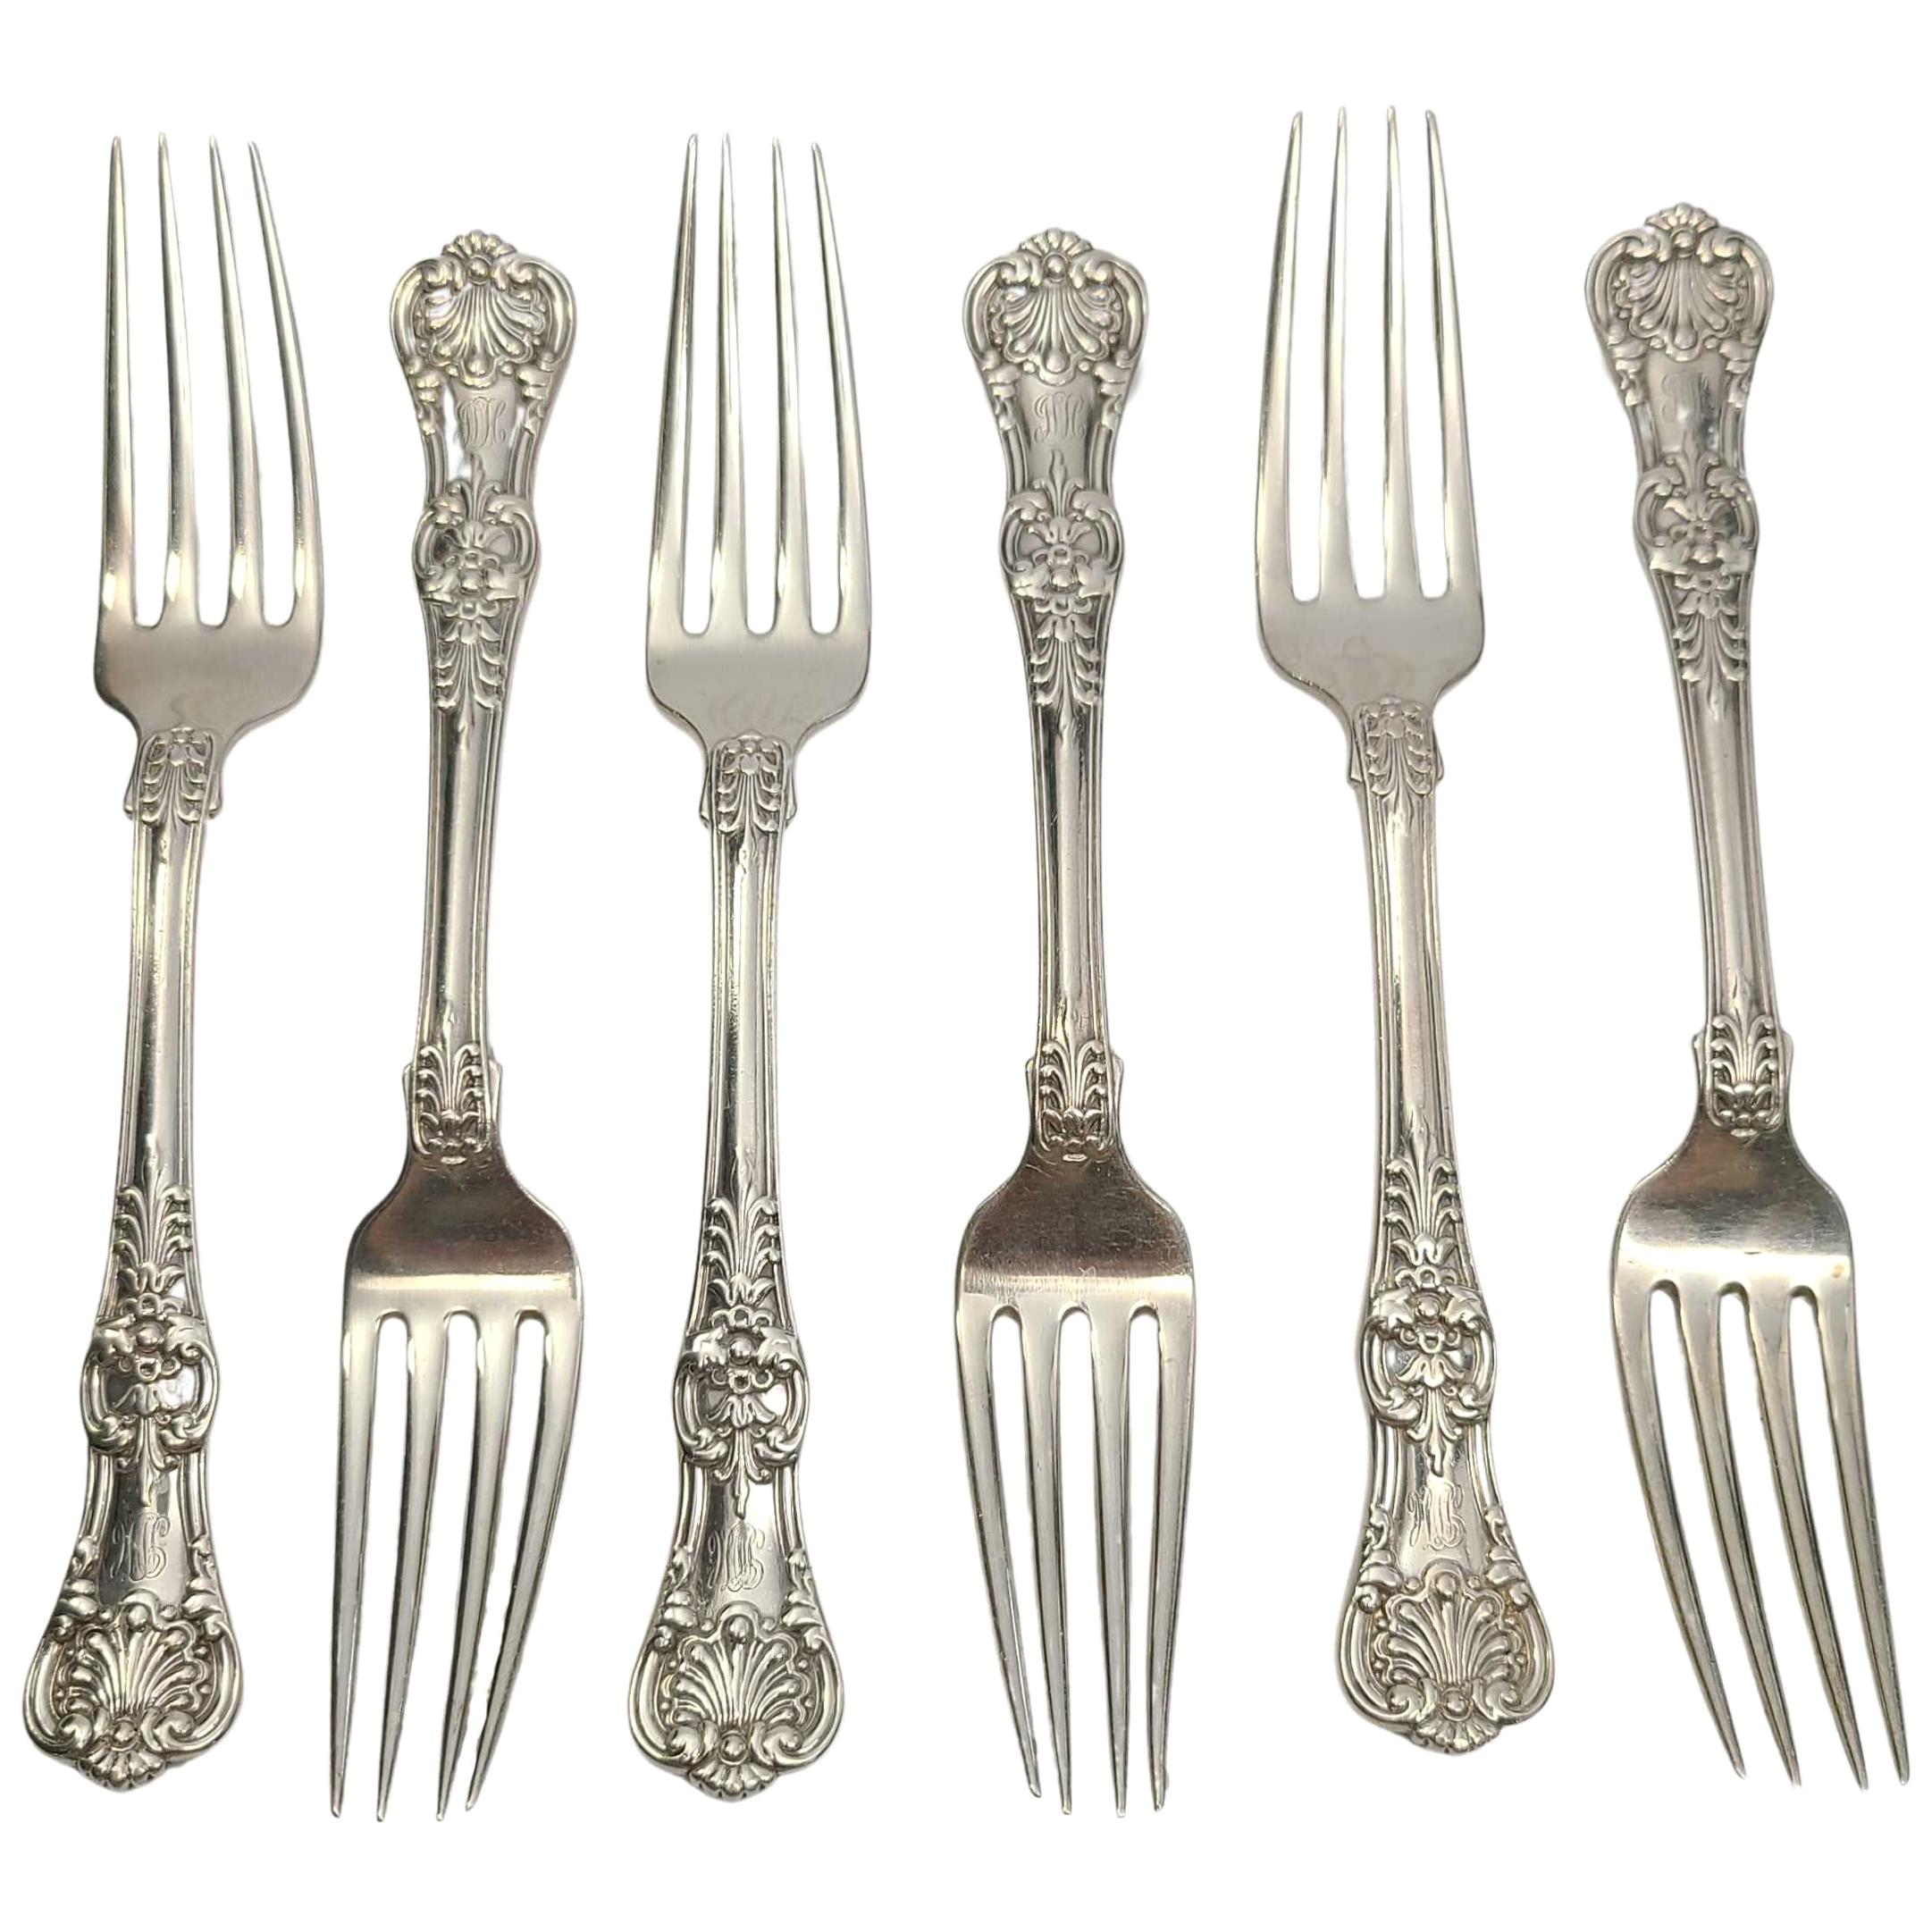 Set of 6 Tiffany & Co Sterling Silver English King Forks with Monogram